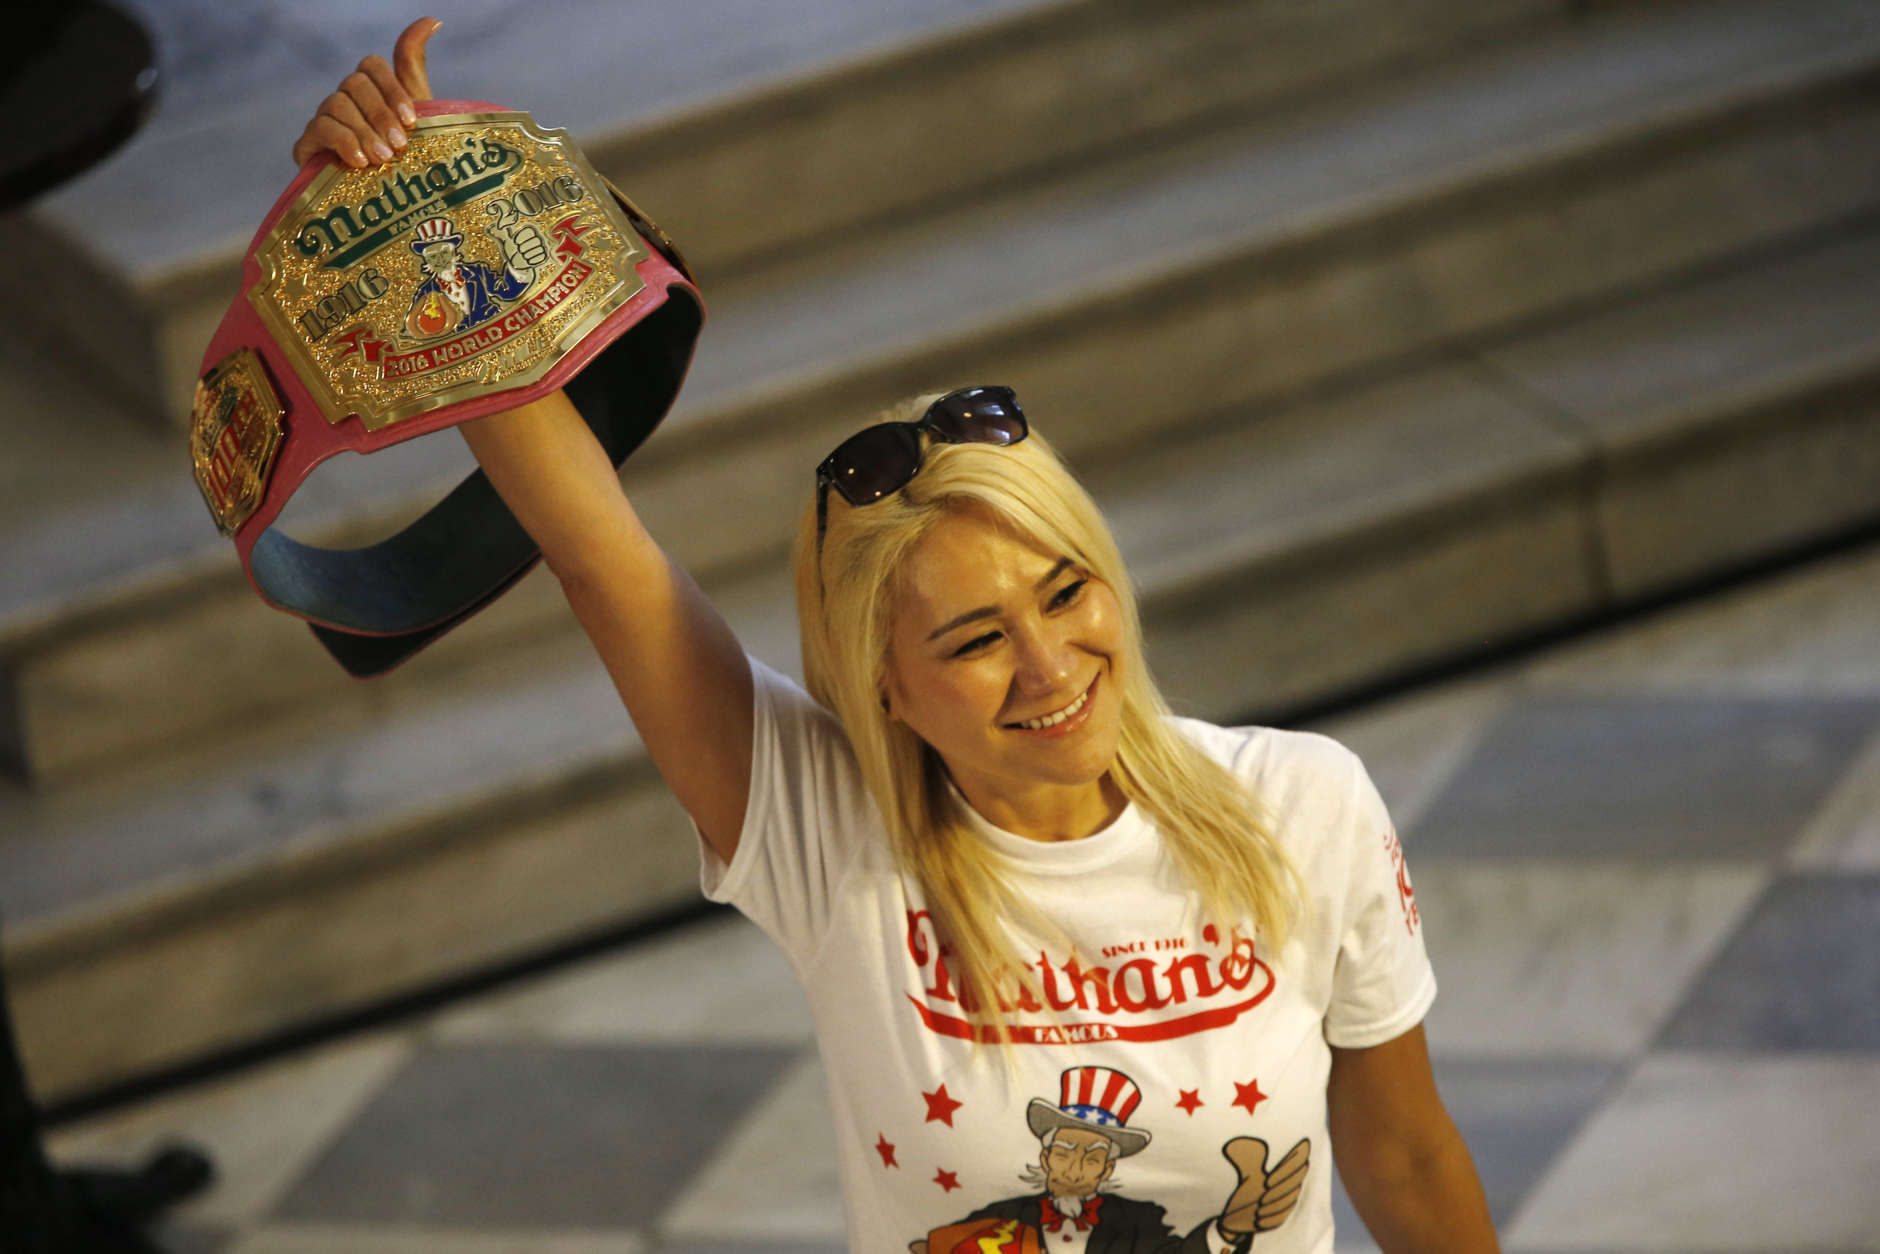 Miki Sudo, Las Vegas the woman hot dog-eating champion is introduced before taking part in the weight in for the Nathan's Famous Hotdog eating contest Monday, July 3, 2017, in Brooklyn, New York. Sudo is defending her title where she ate 38.5 hot dogs and buns in 10 minutes in 2016. (AP Photo/Michael Noble)